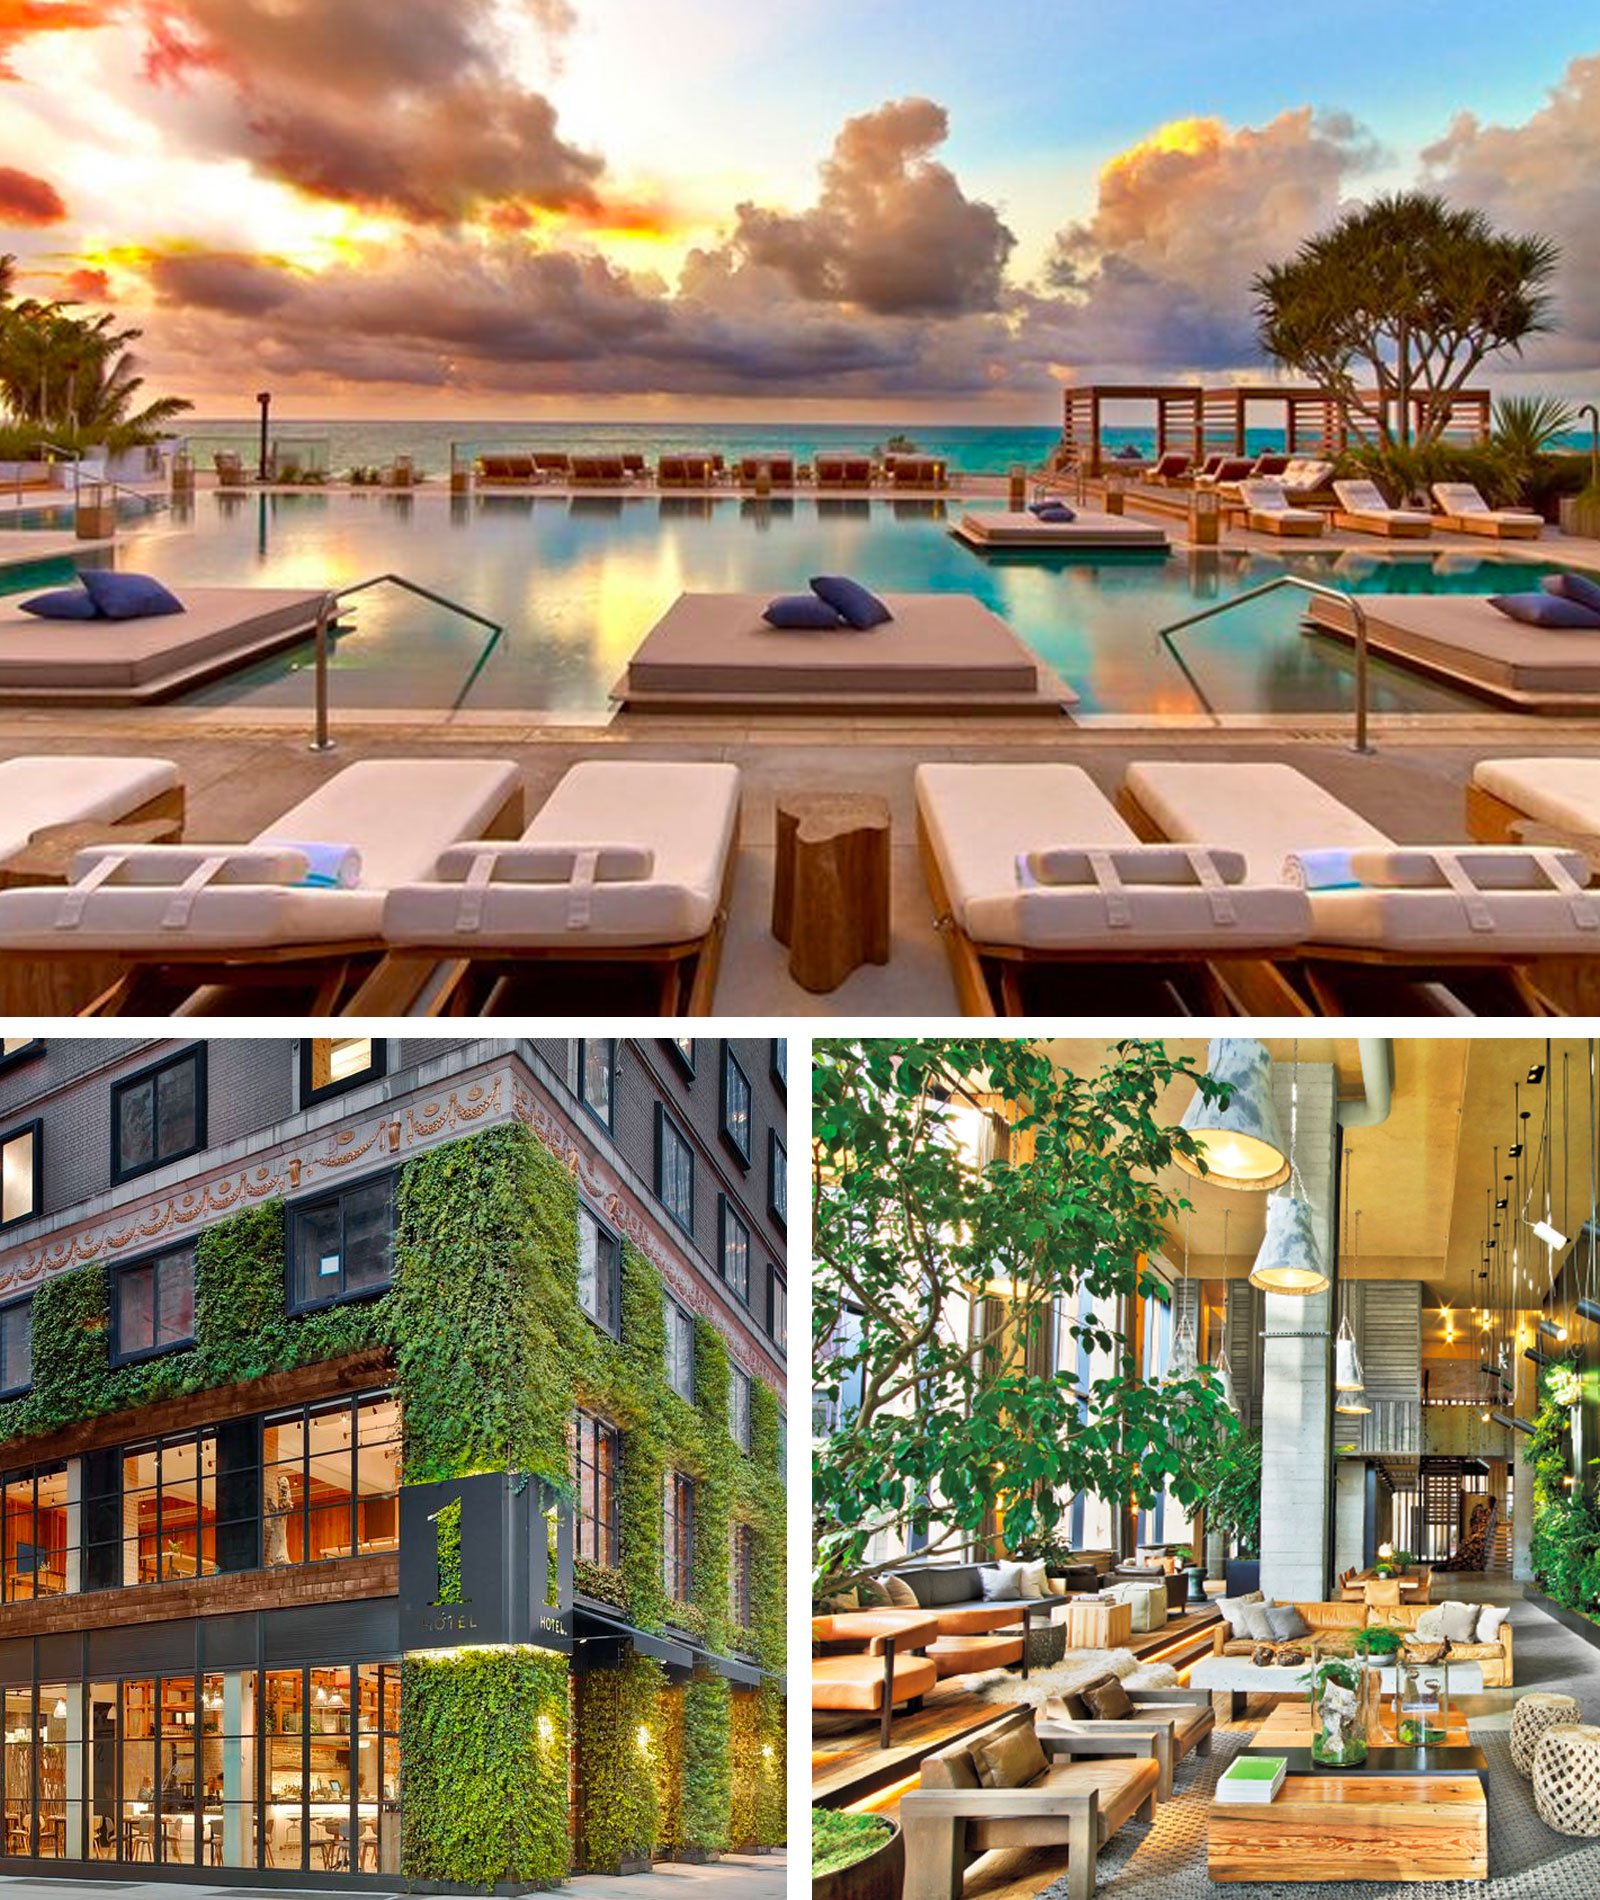 Other 1 Hotel locations include South Beach in Miami (top), Central Park (bottom left) and Brooklyn  in New York City (bottom right).